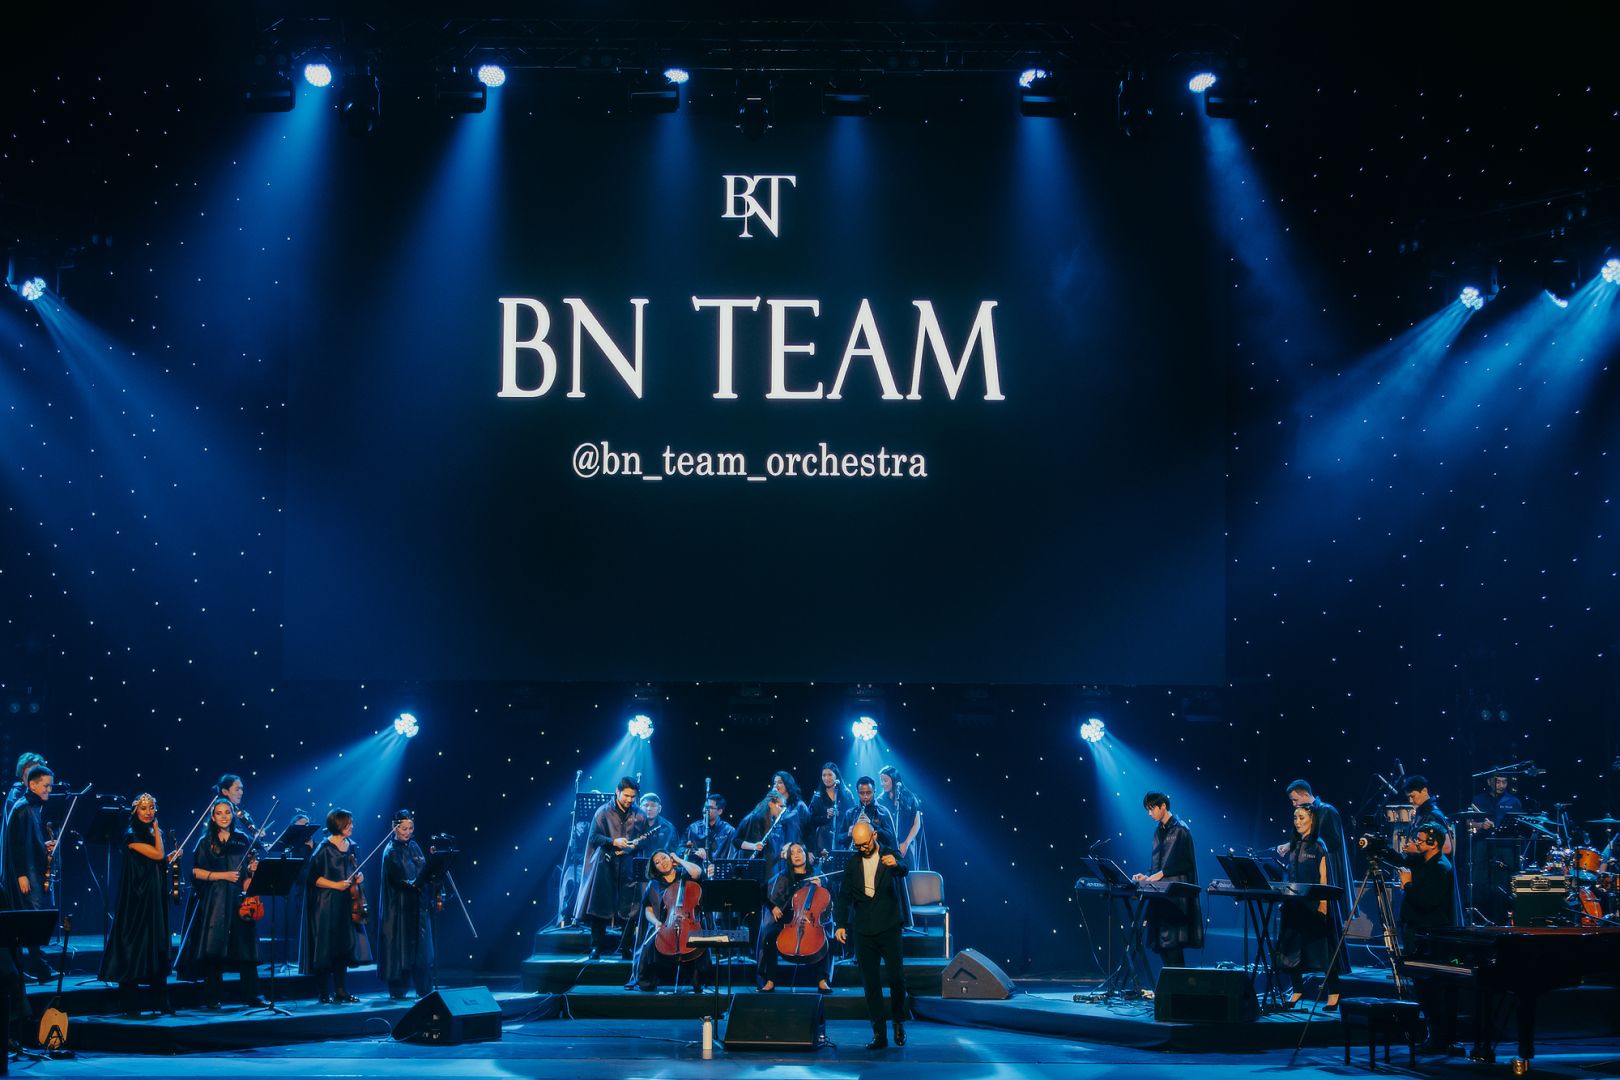 BN Team Orchestra to delight Baku audience with unforgettable show [EXCLUSIVE]